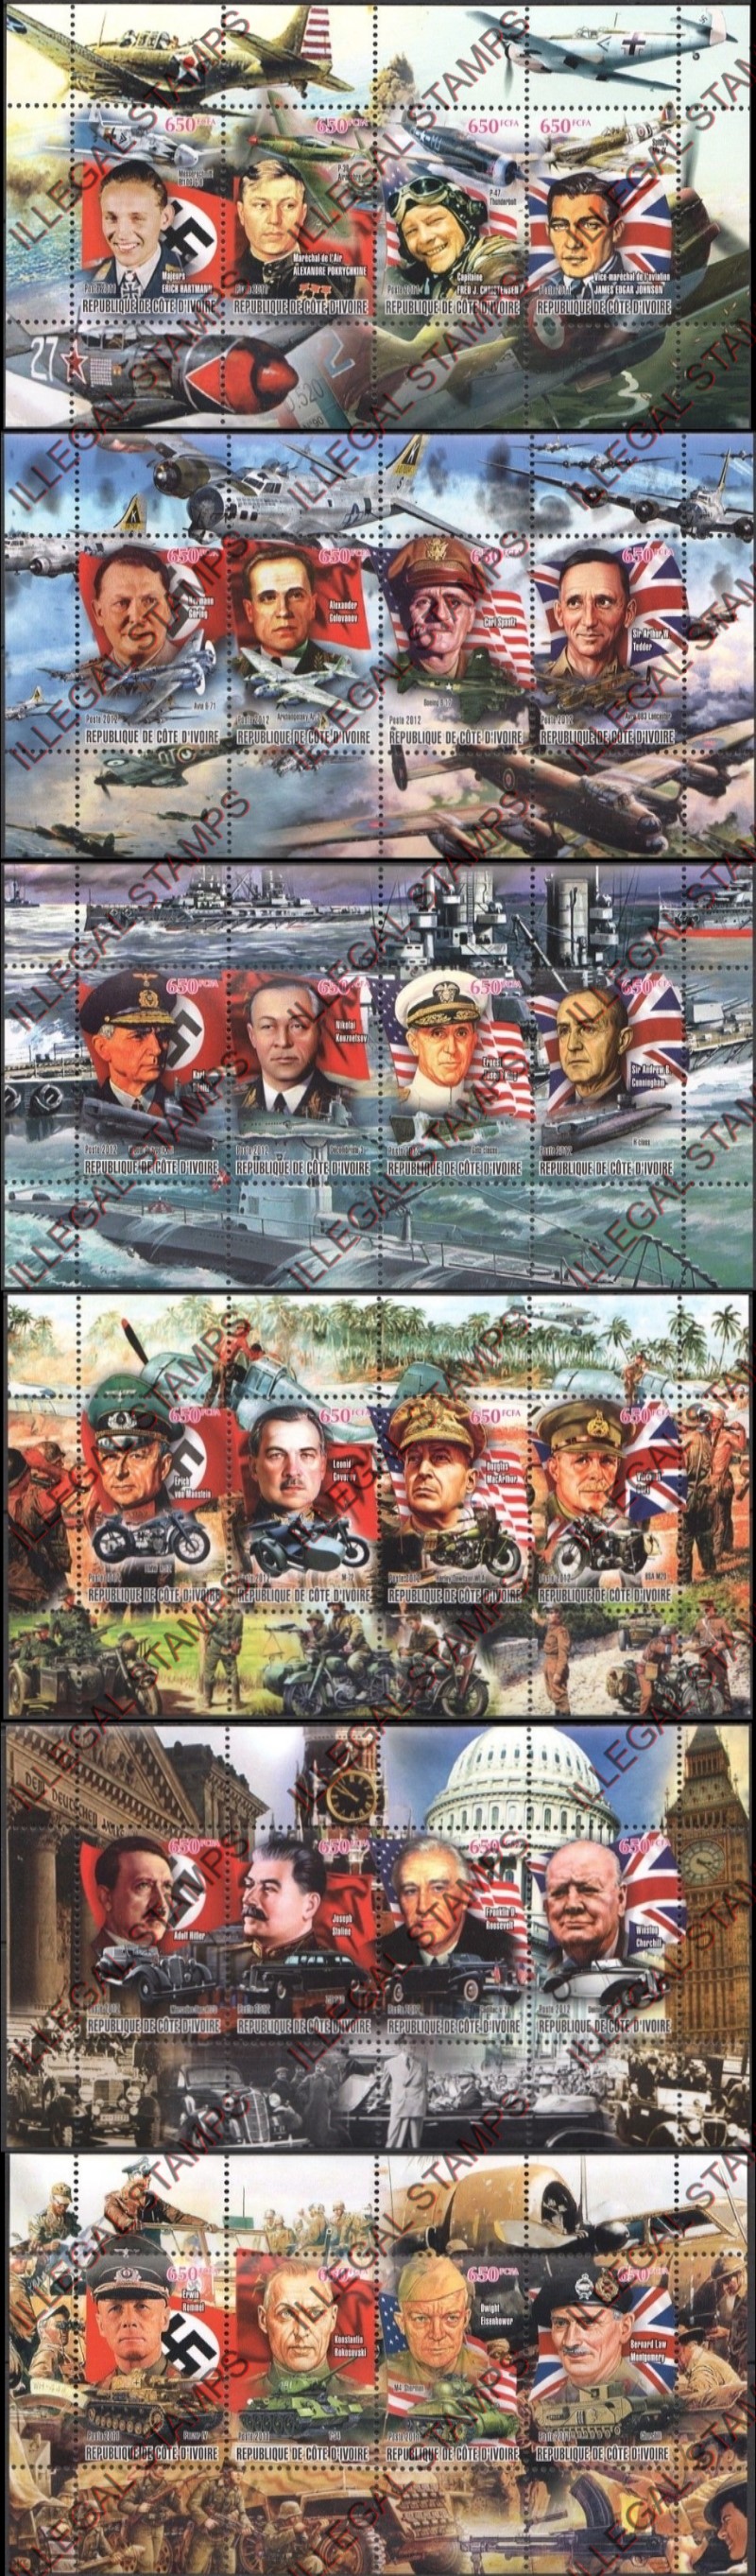 Ivory Coast 2011 World War II Leaders Illegal Stamp Souvenir Sheets of 4